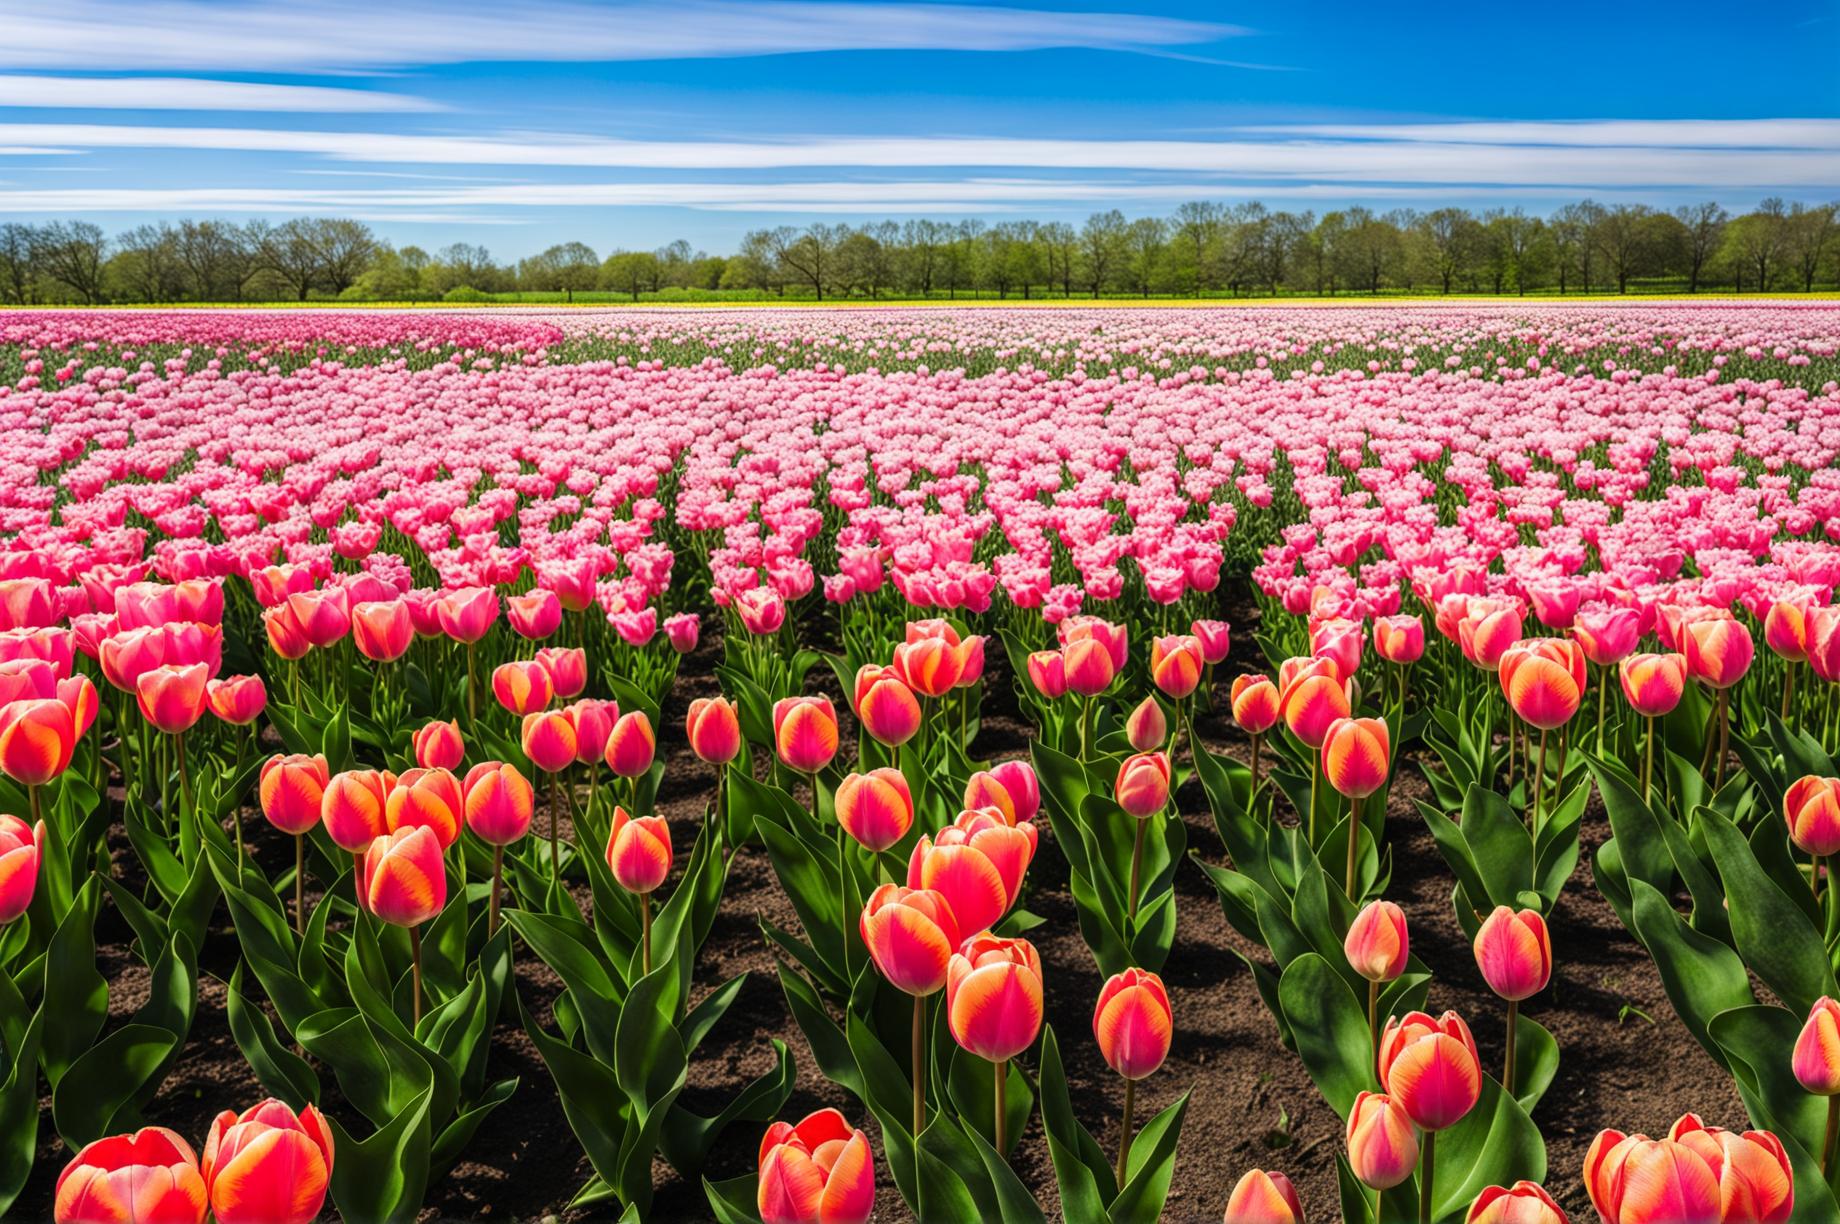 High-definition photograph of a pink and white tulip field under a clear blue sky, designed for use as a wallpaper